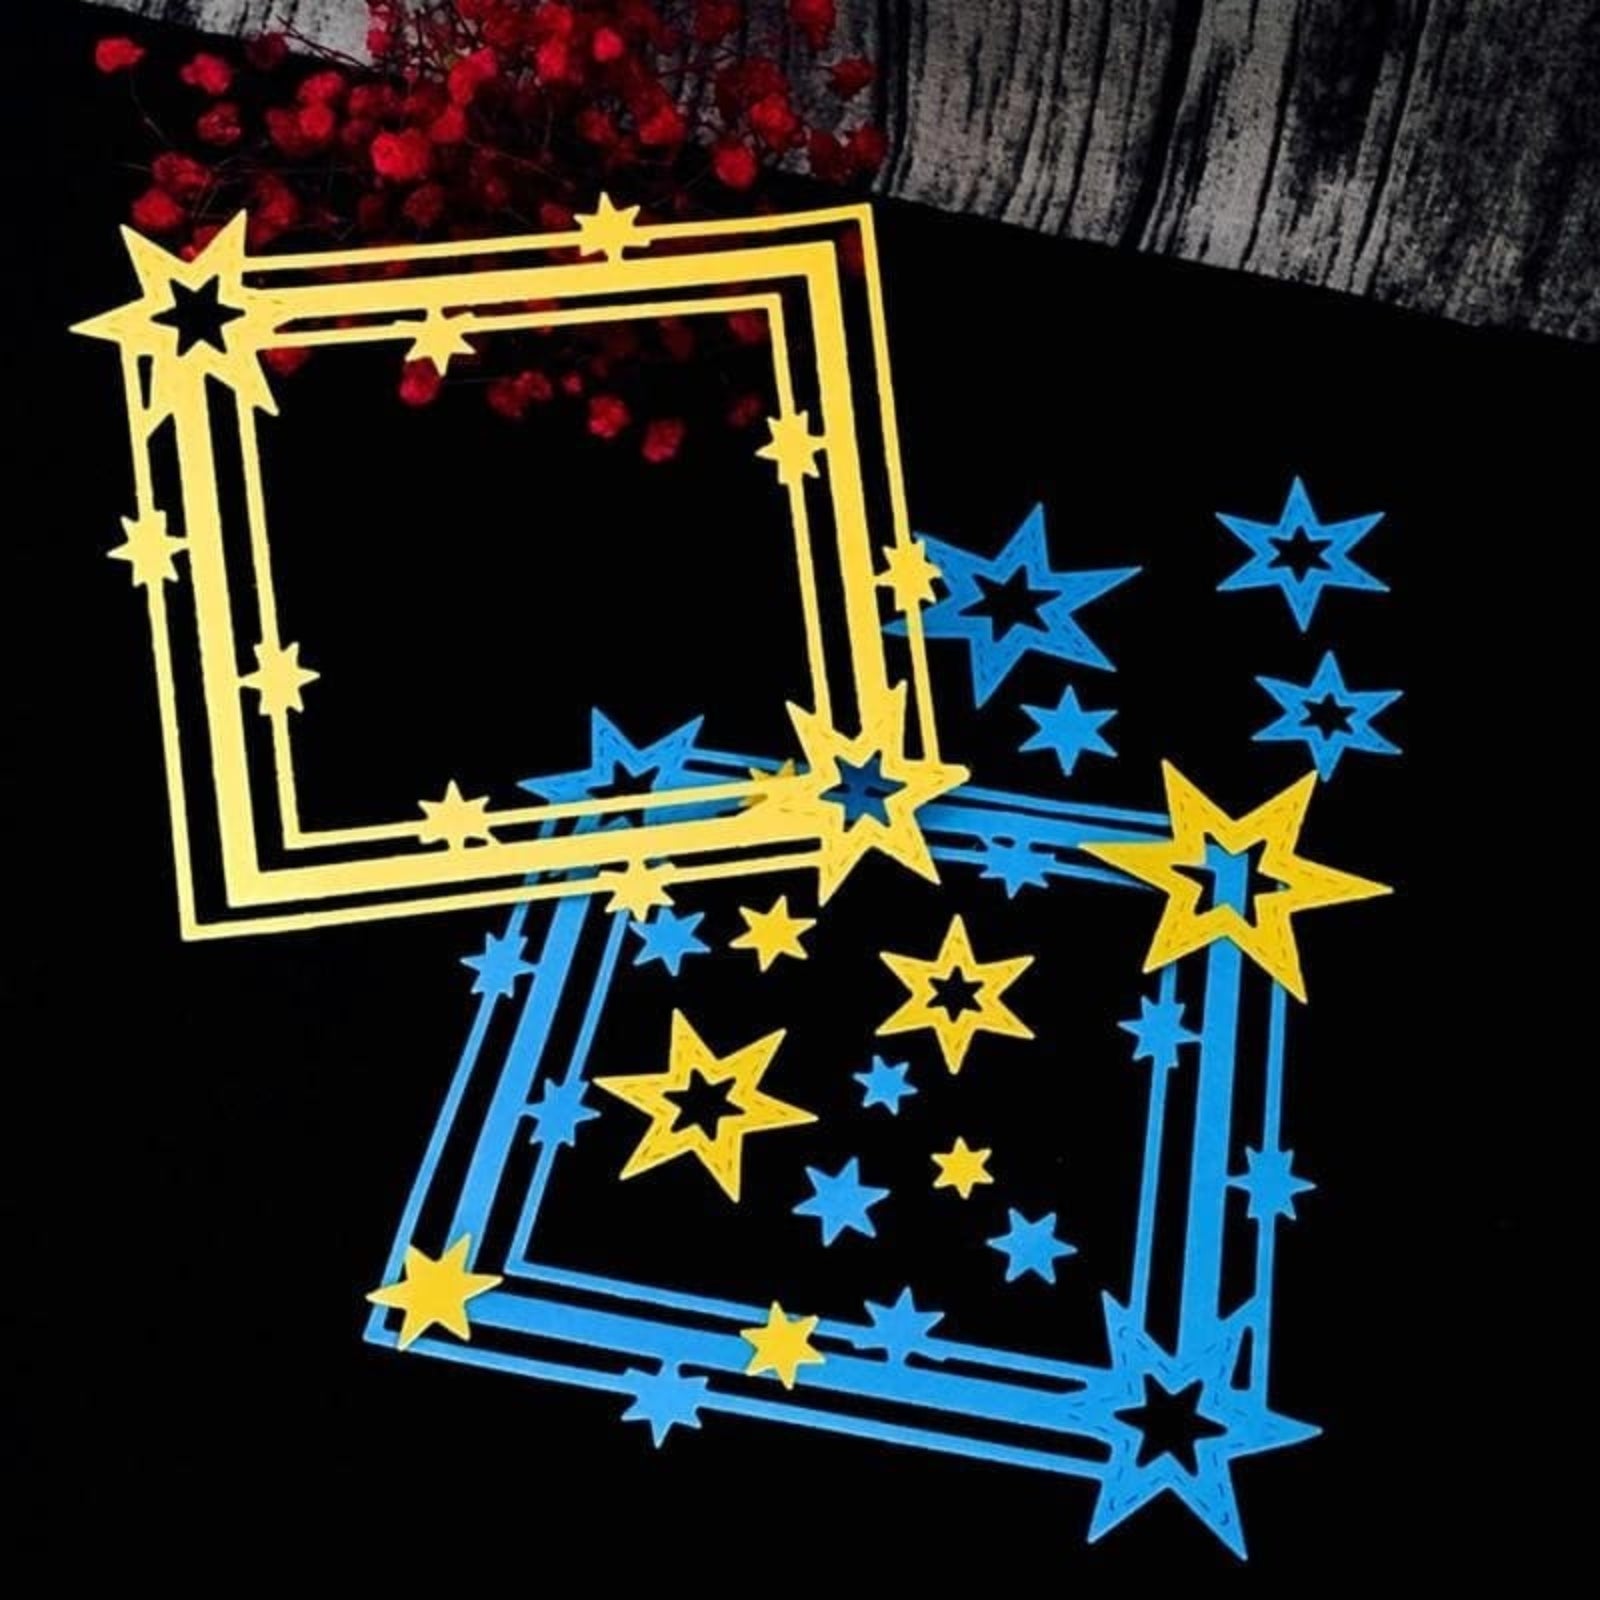 Rectangular Frame w Six-Pointed Stars Cutting & Embossing Dies